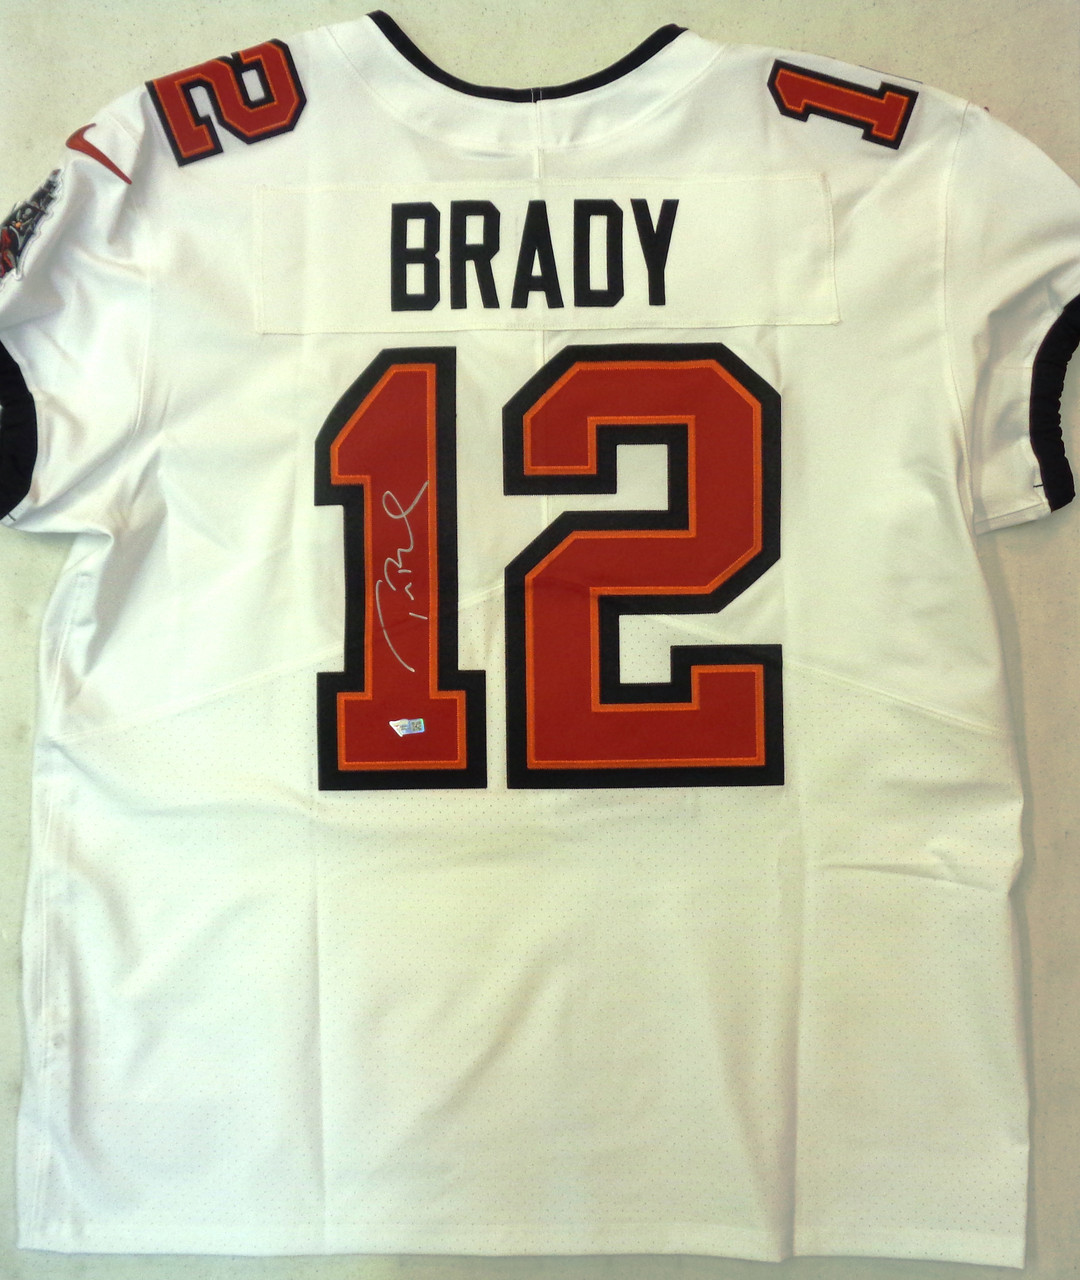 Tom Brady Autographed Tampa Bay Buccaneers Nike Elite Jersey - White